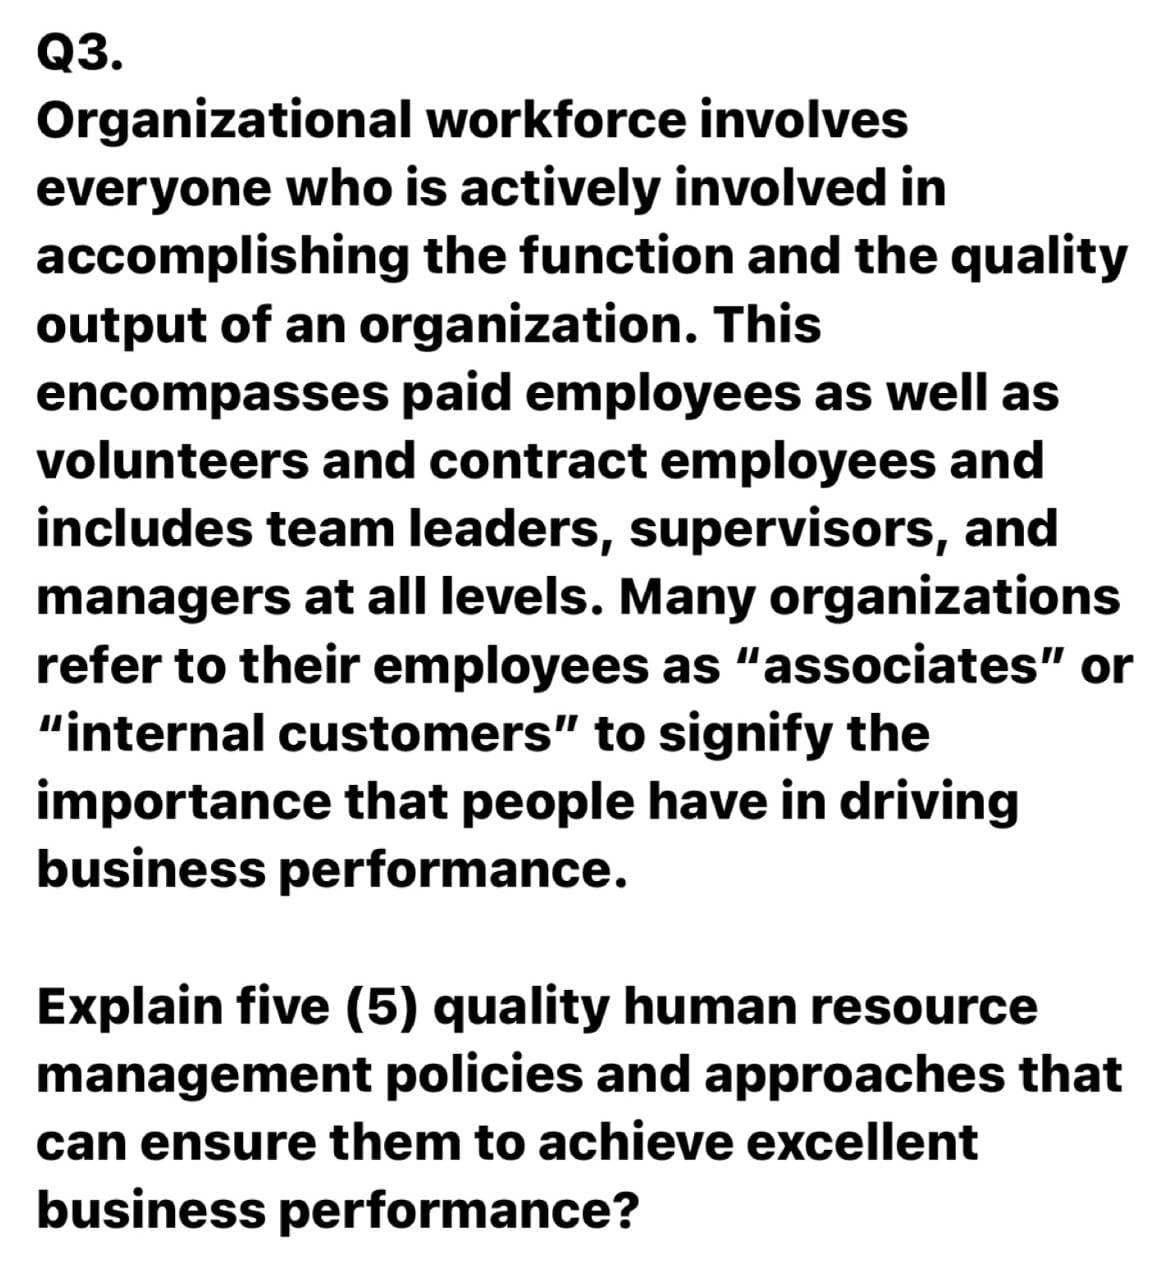 Q3.
Organizational workforce involves
everyone who is actively involved in
accomplishing the function and the quality
output of an organization. This
encompasses paid employees as well as
volunteers and contract employees and
includes team leaders, supervisors, and
managers at all levels. Many organizations
refer to their employees as "associates" or
"internal customers" to signify the
importance that people have in driving
business performance.
Explain five (5) quality human resource
management policies and approaches that
can ensure them to achieve excellent
business performance?
